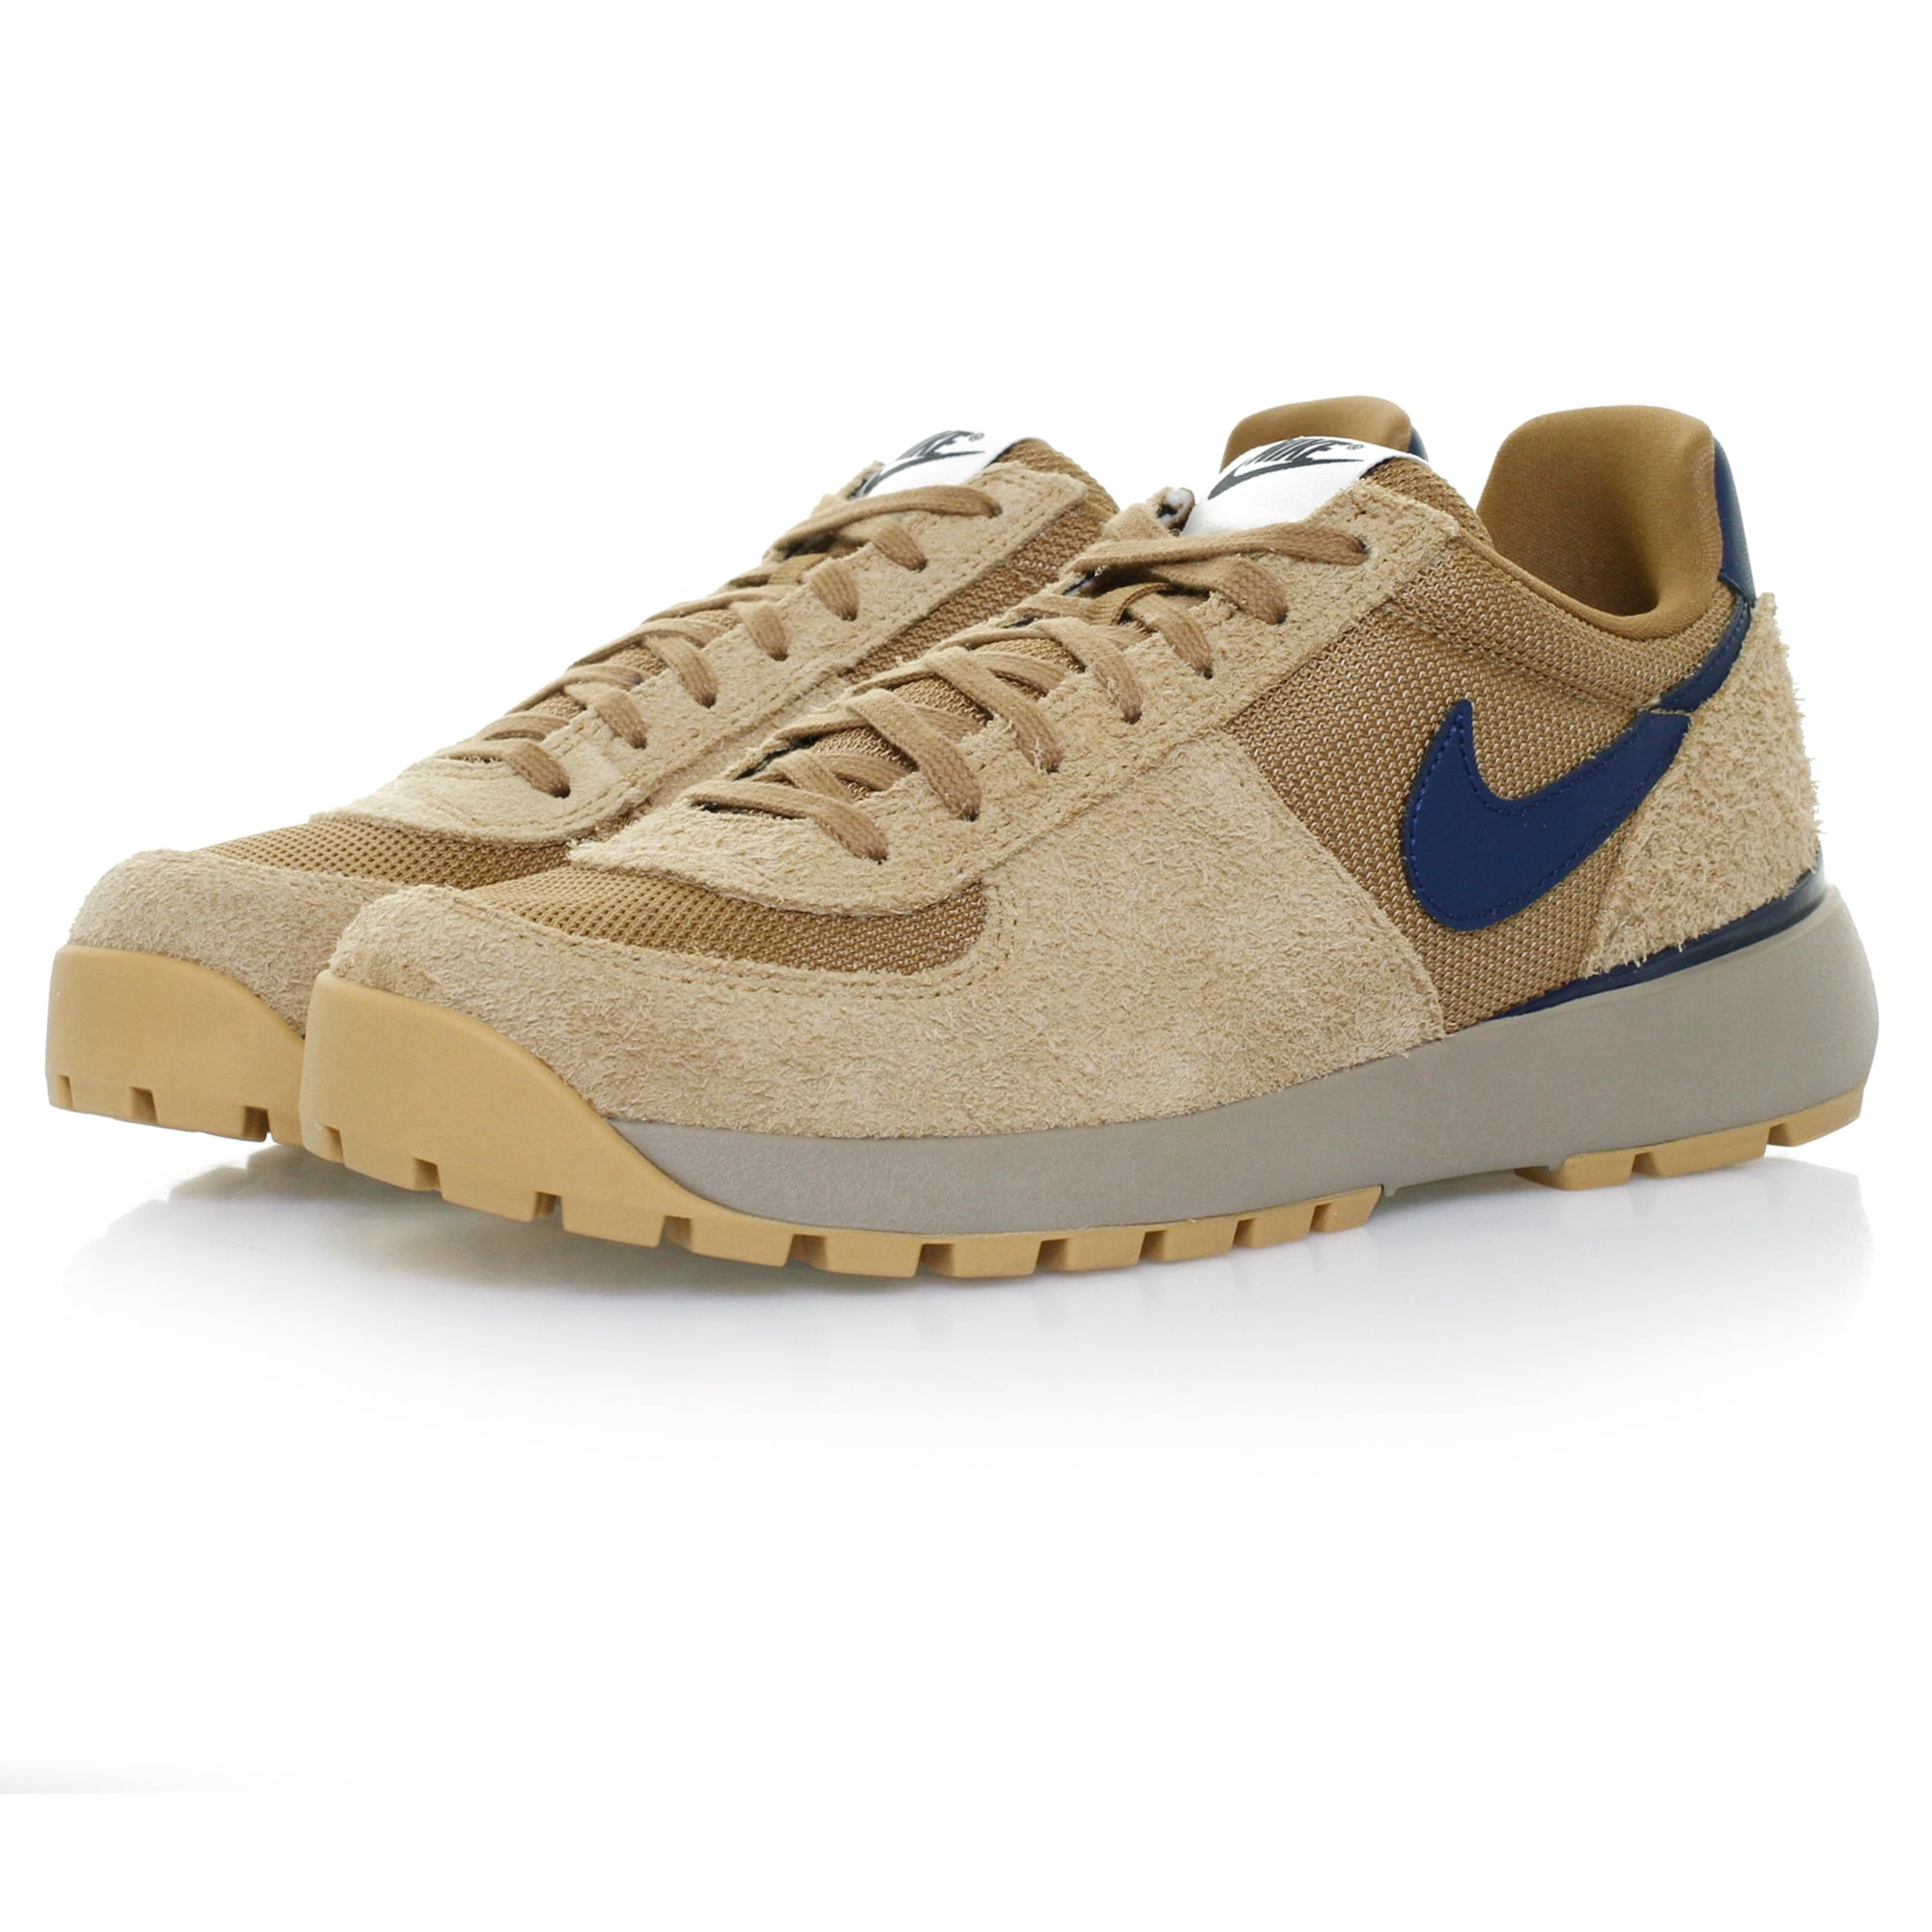 nike-lavadome-ultra-gold-mid-navy-shoe-844574-700-p24764-94089_zoom